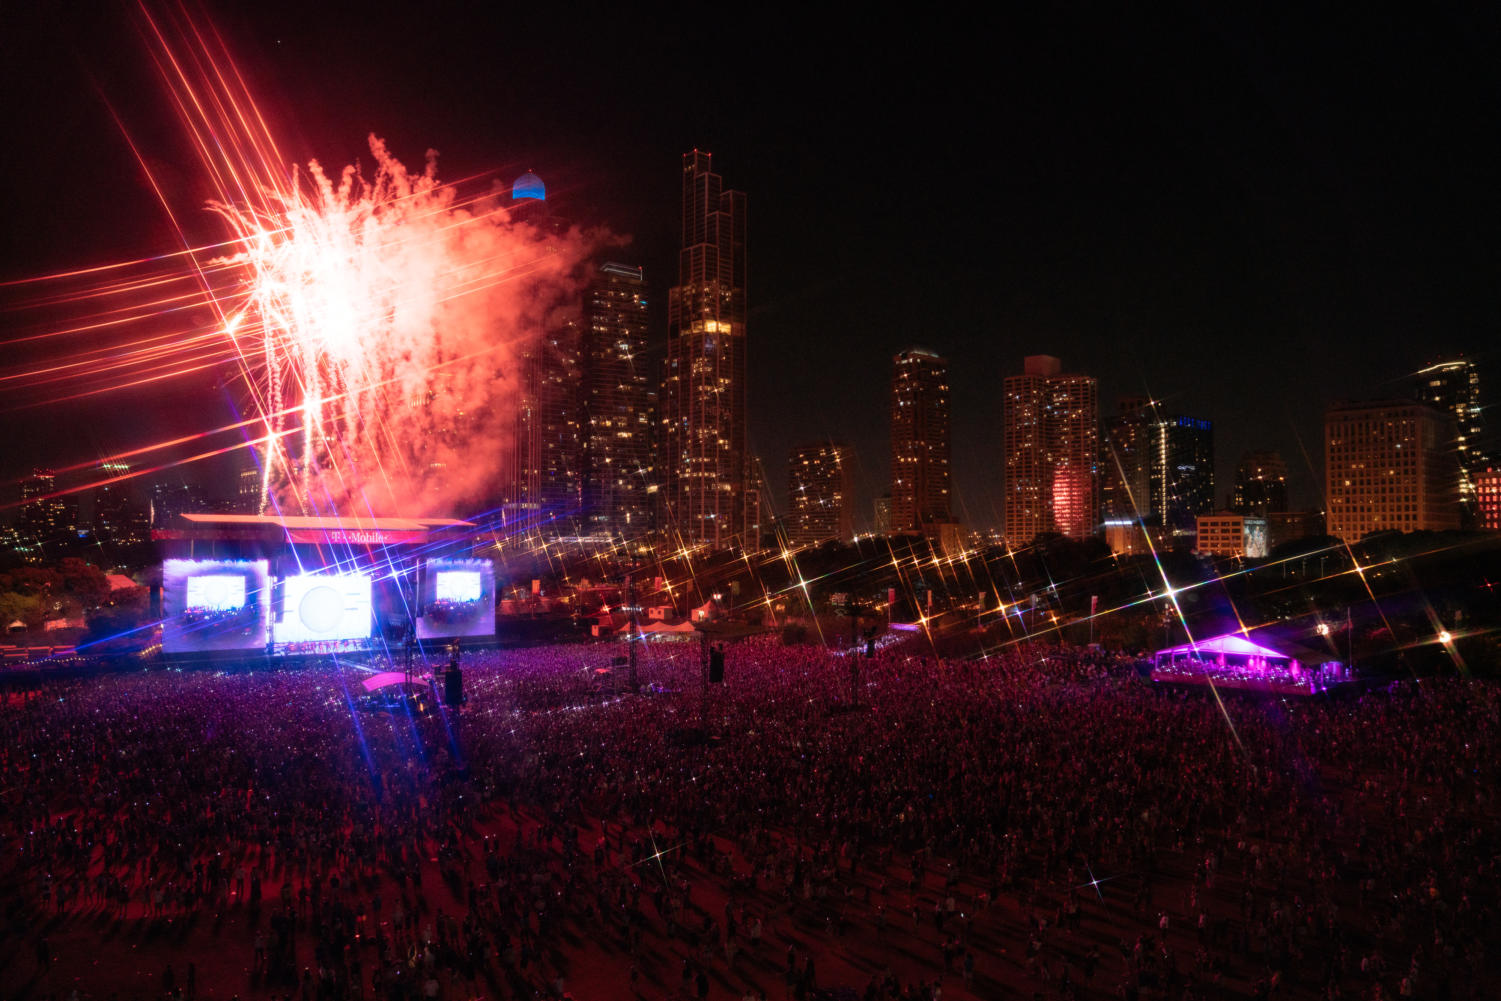 Fireworks go off at the end of Ariana Grande's set that closed out Lollapalooza this year.